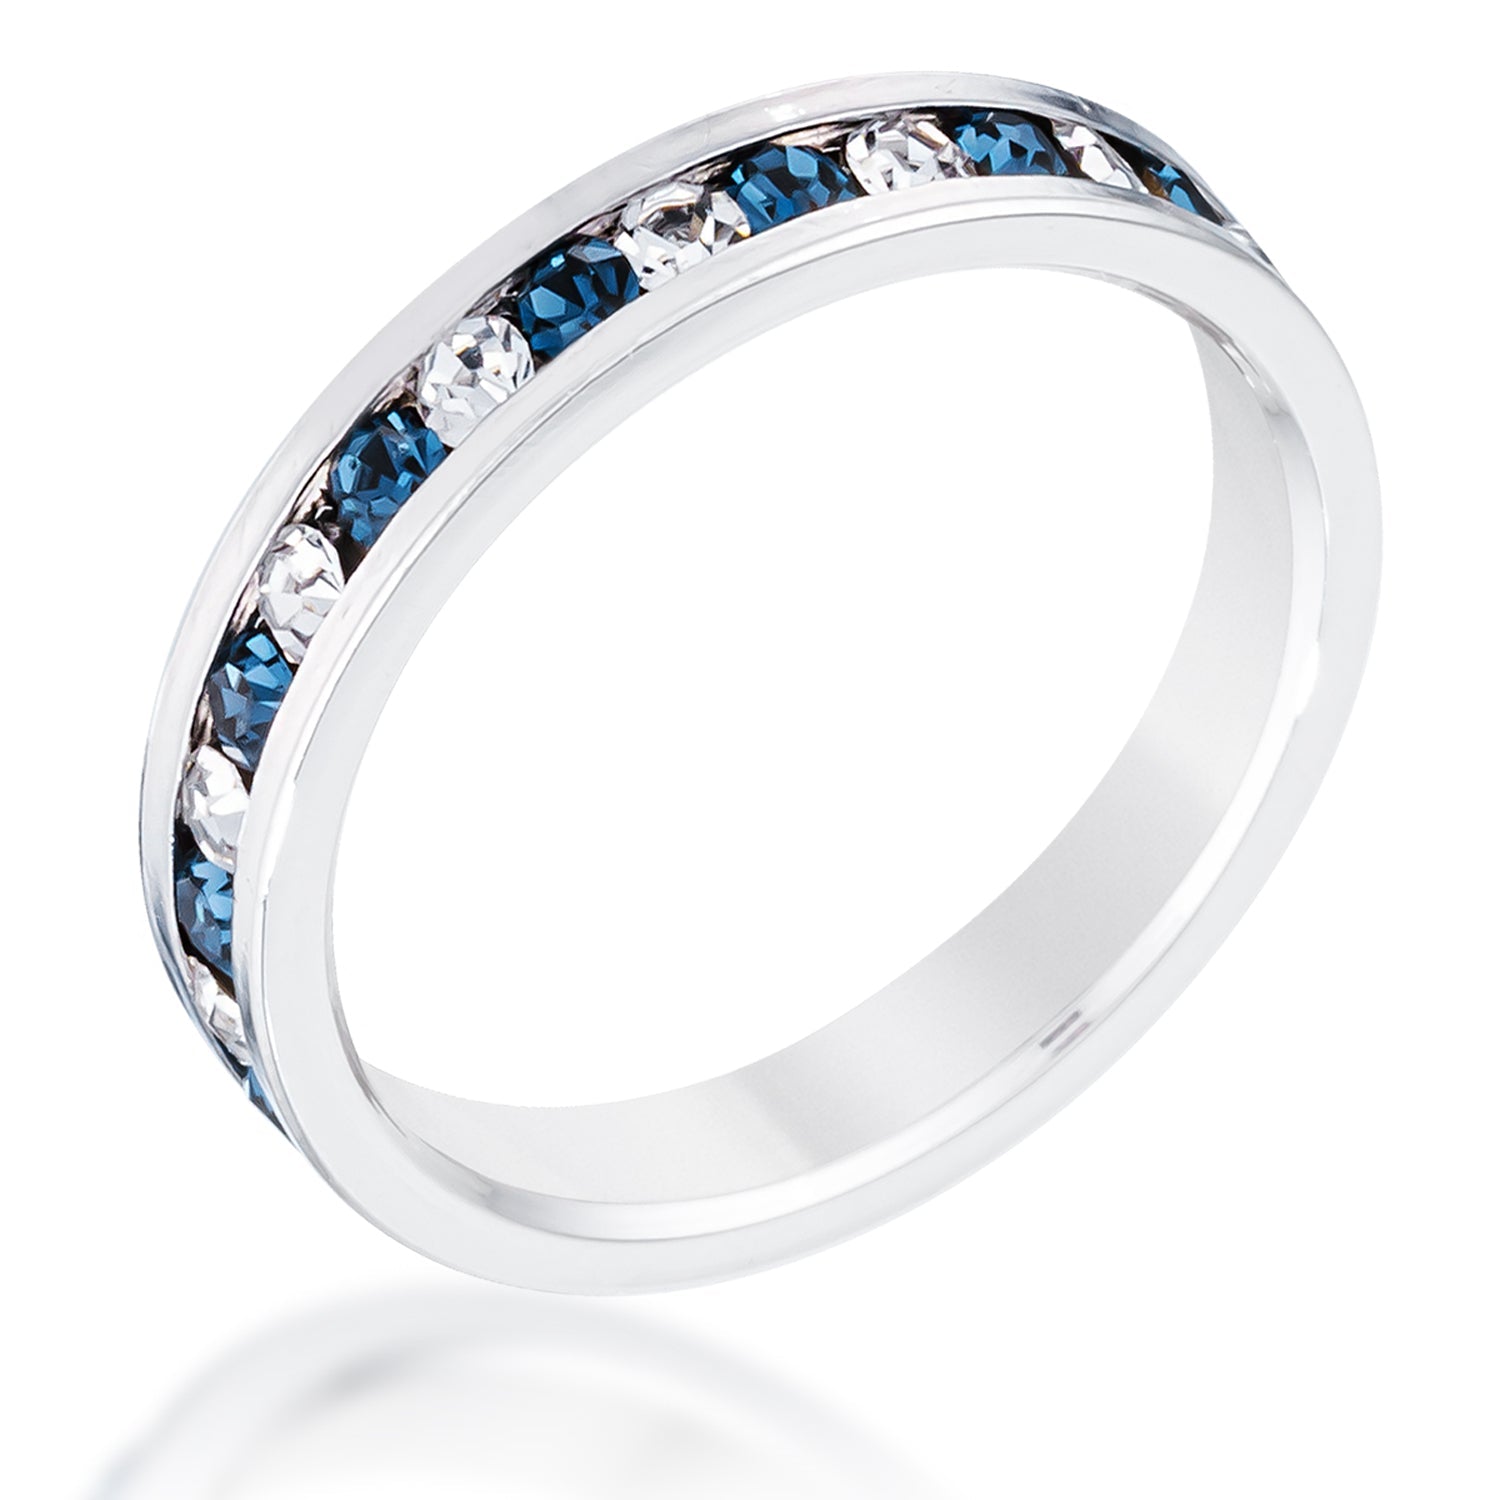 Clear and Blue Alternating Crystal Eternity Ring, <b>Size 5</b> - LinkagejewelrydesignLinkagejewelrydesign